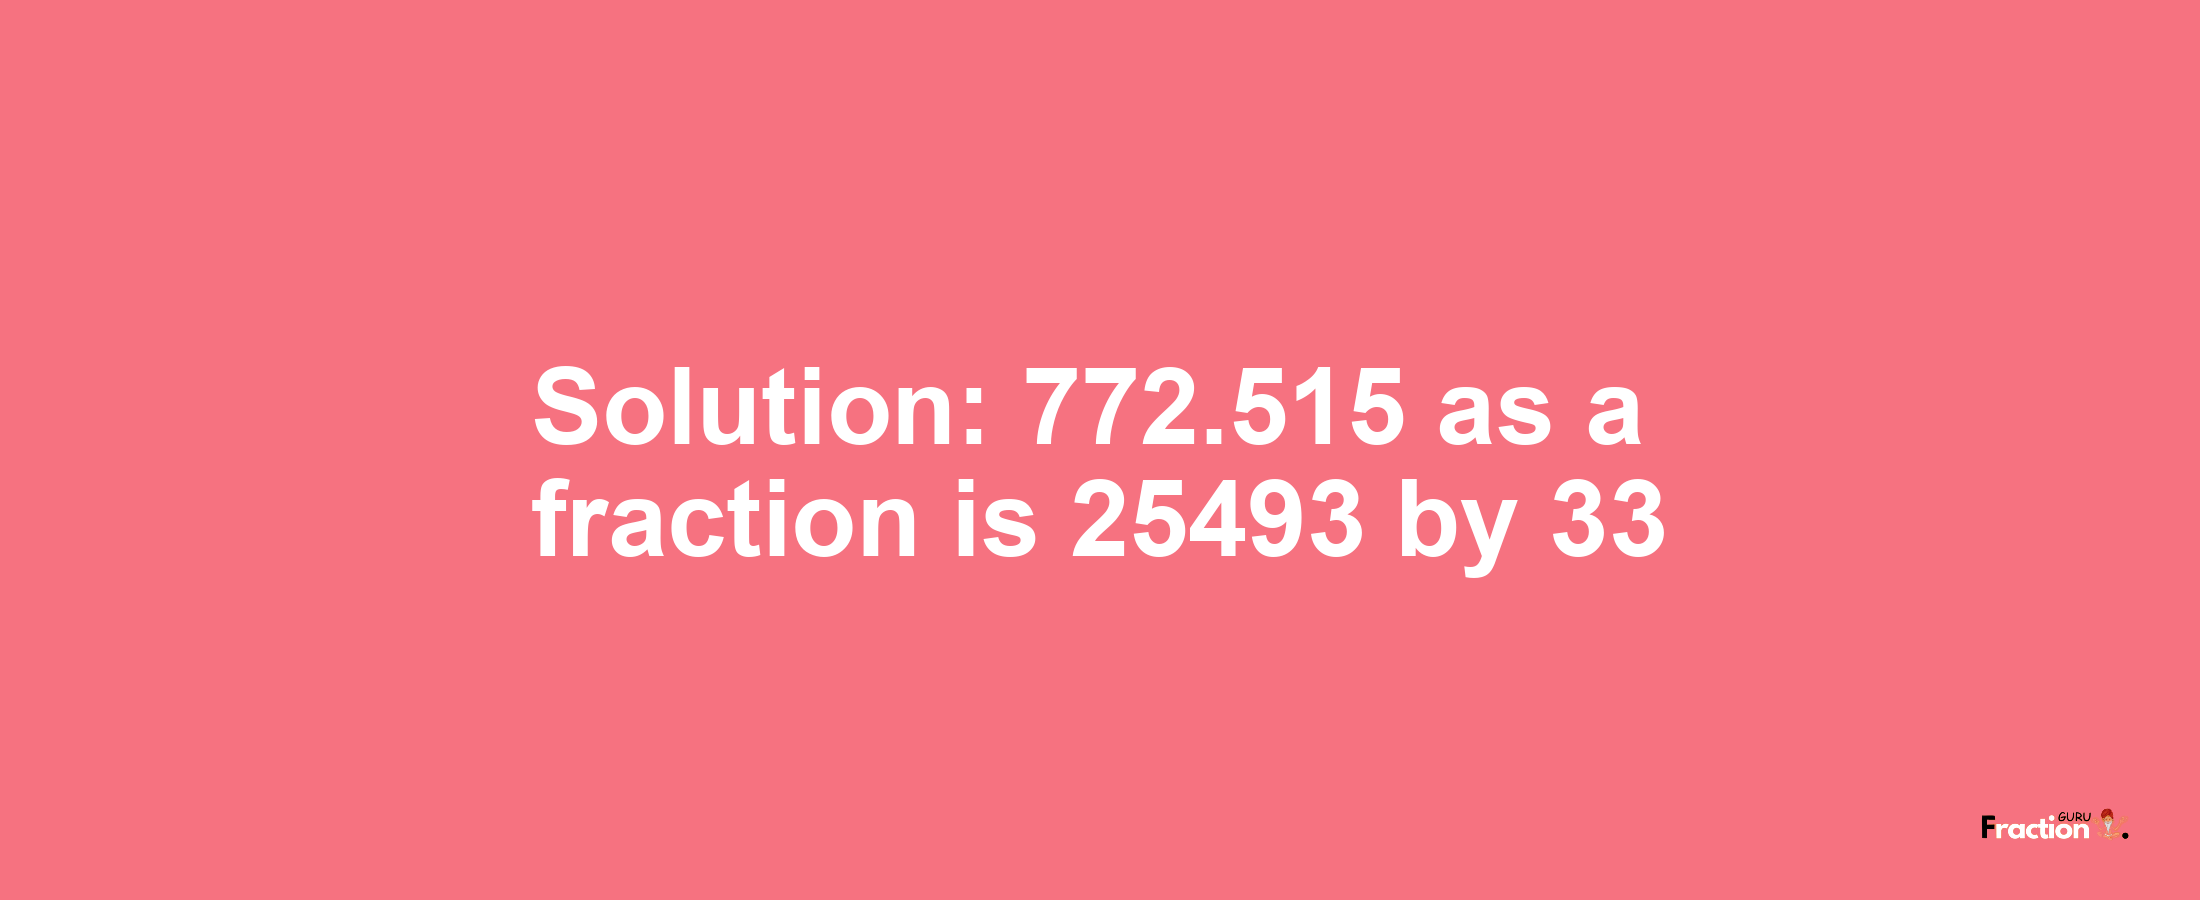 Solution:772.515 as a fraction is 25493/33